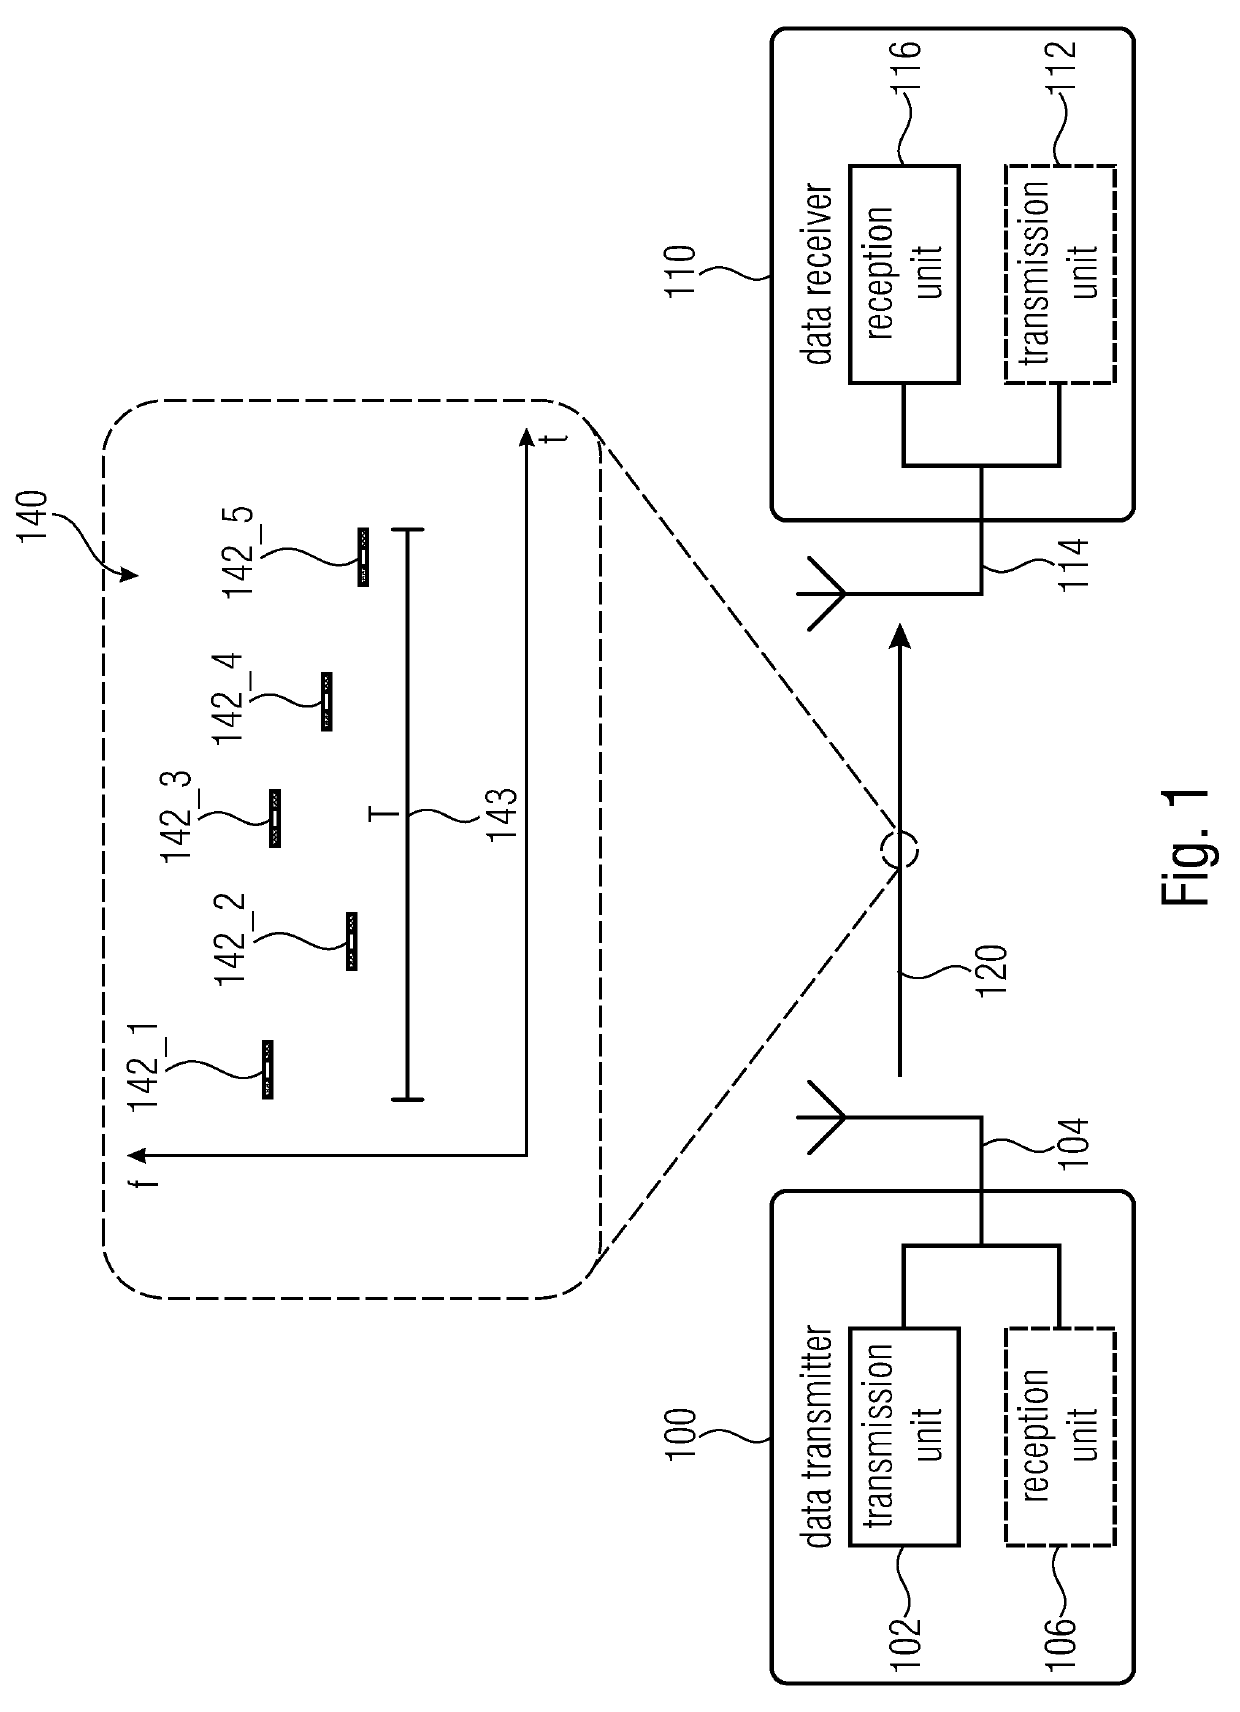 Variable sub-packet lengths for telegram splitting in networks with low power consumption